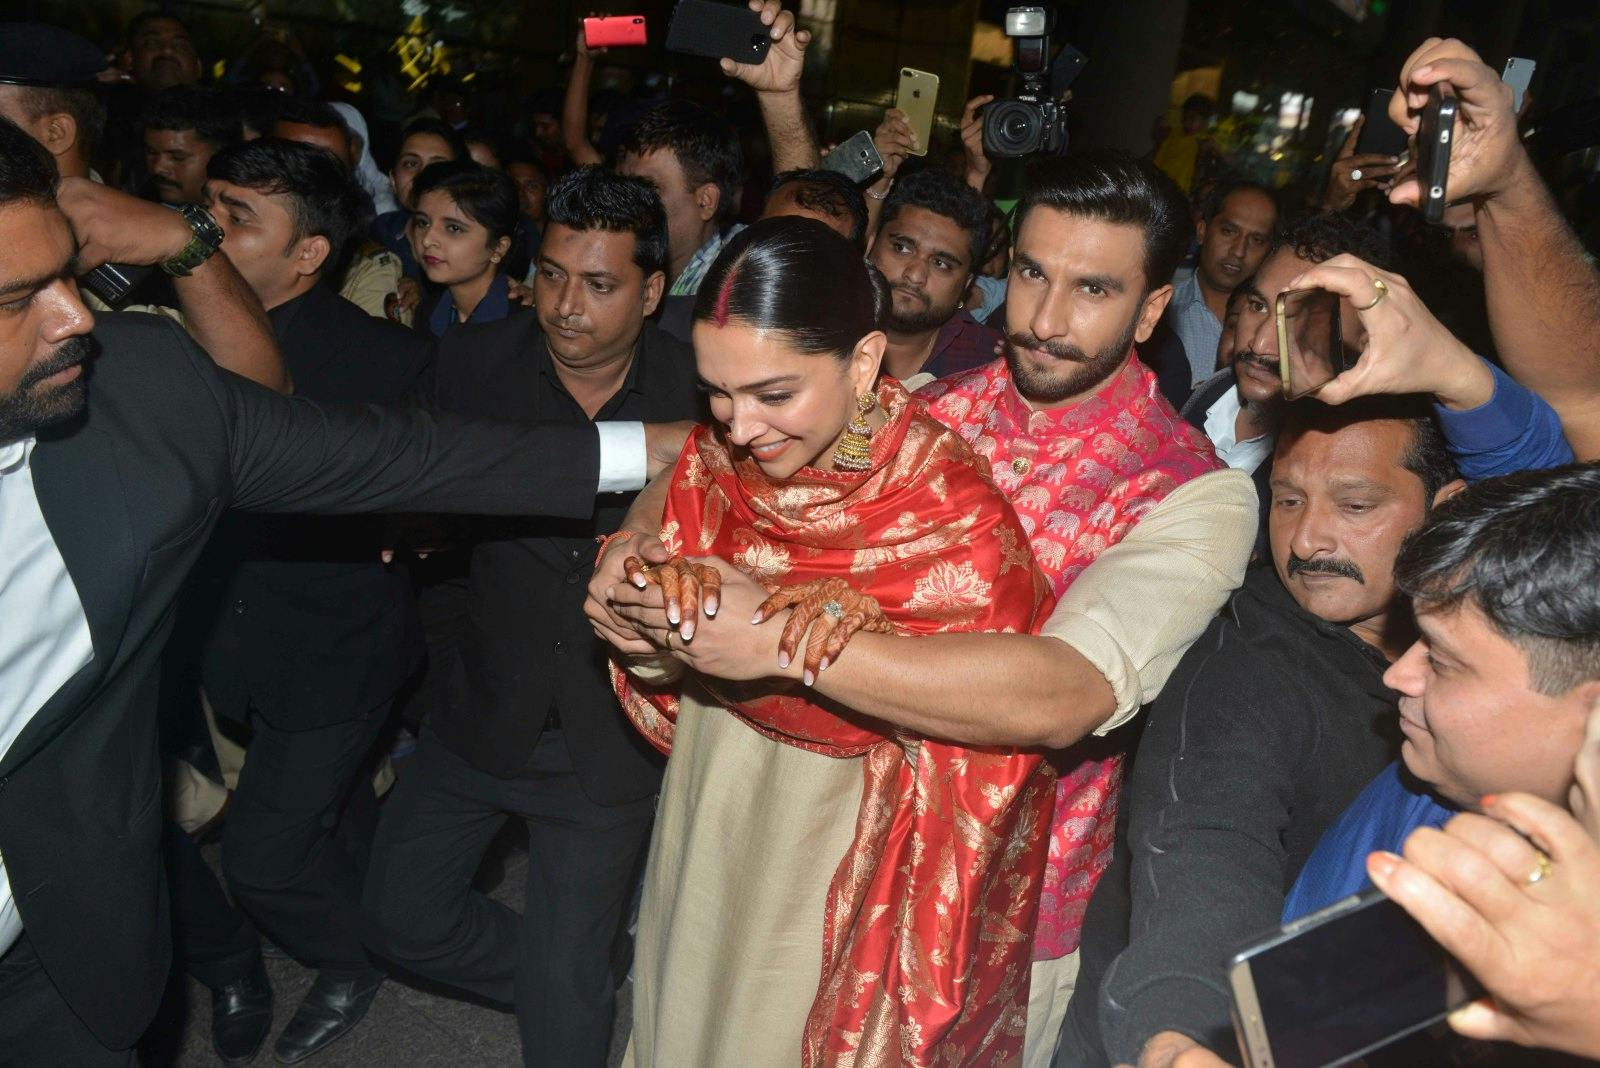 Ranveer Singh and Deepika Padukone arrive at Mumbai airport after their wedding, in Lake Como, Italy. (Milind Shelte/India Today Group/Getty Images)